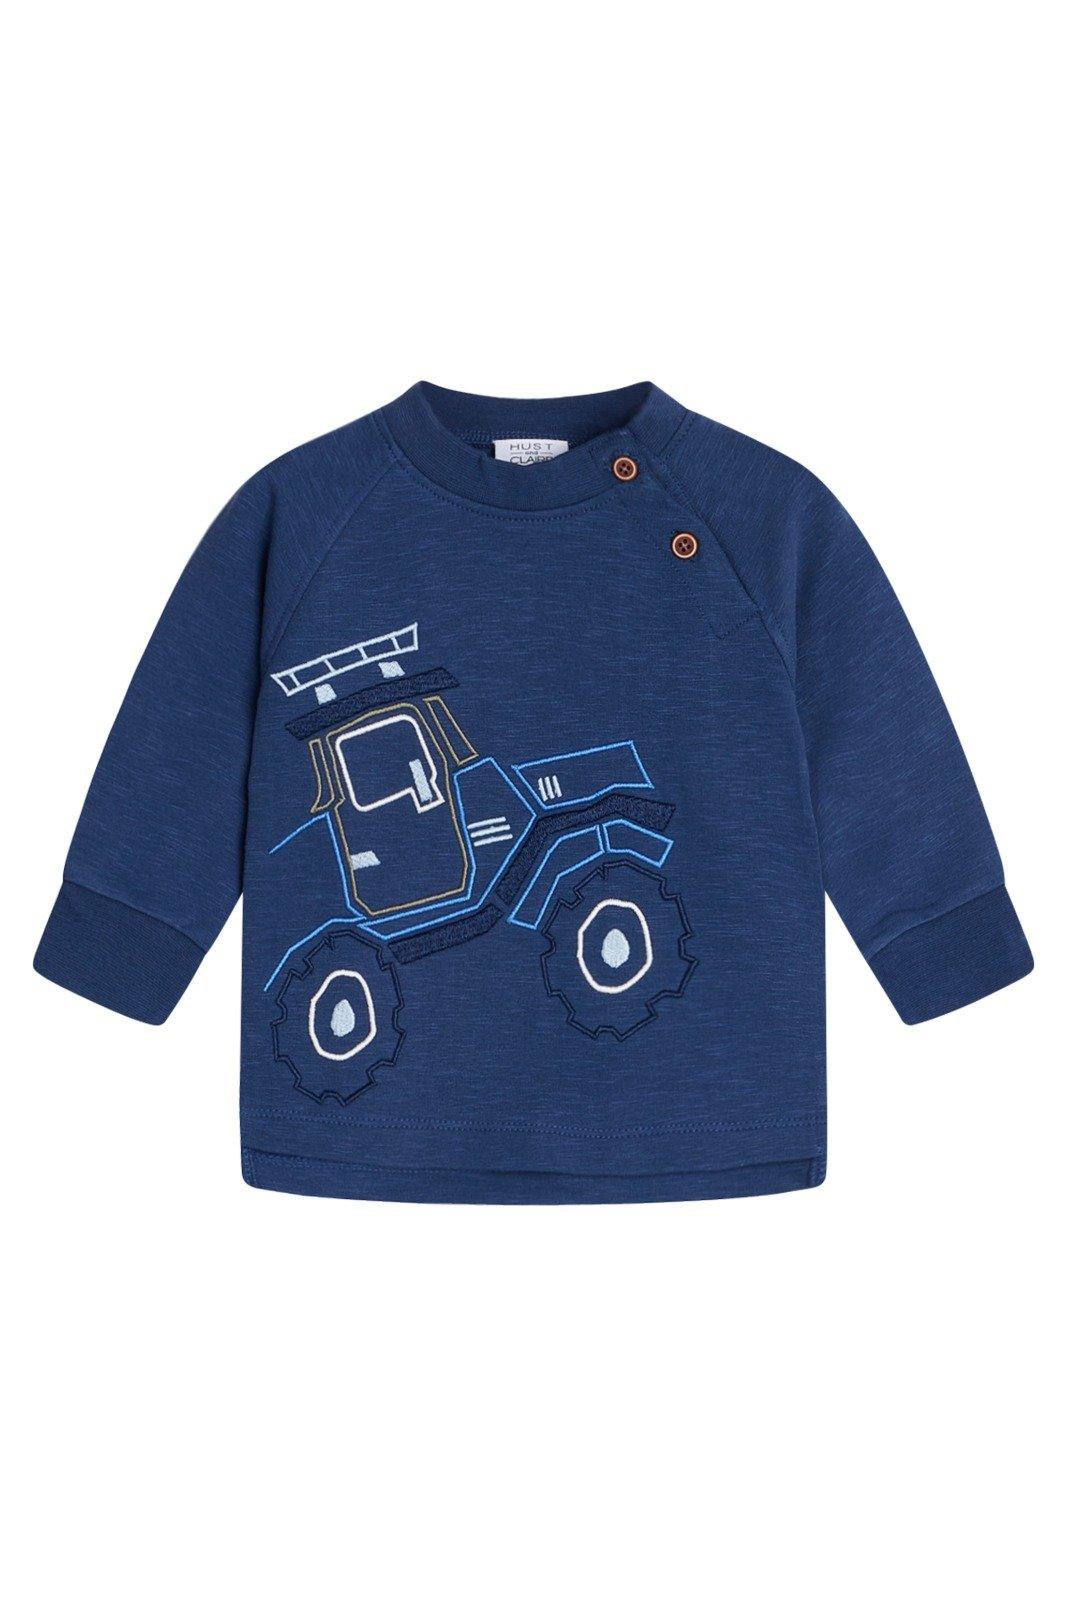 Hust and Claire  Baby Pullover Aslak Blue Moon 